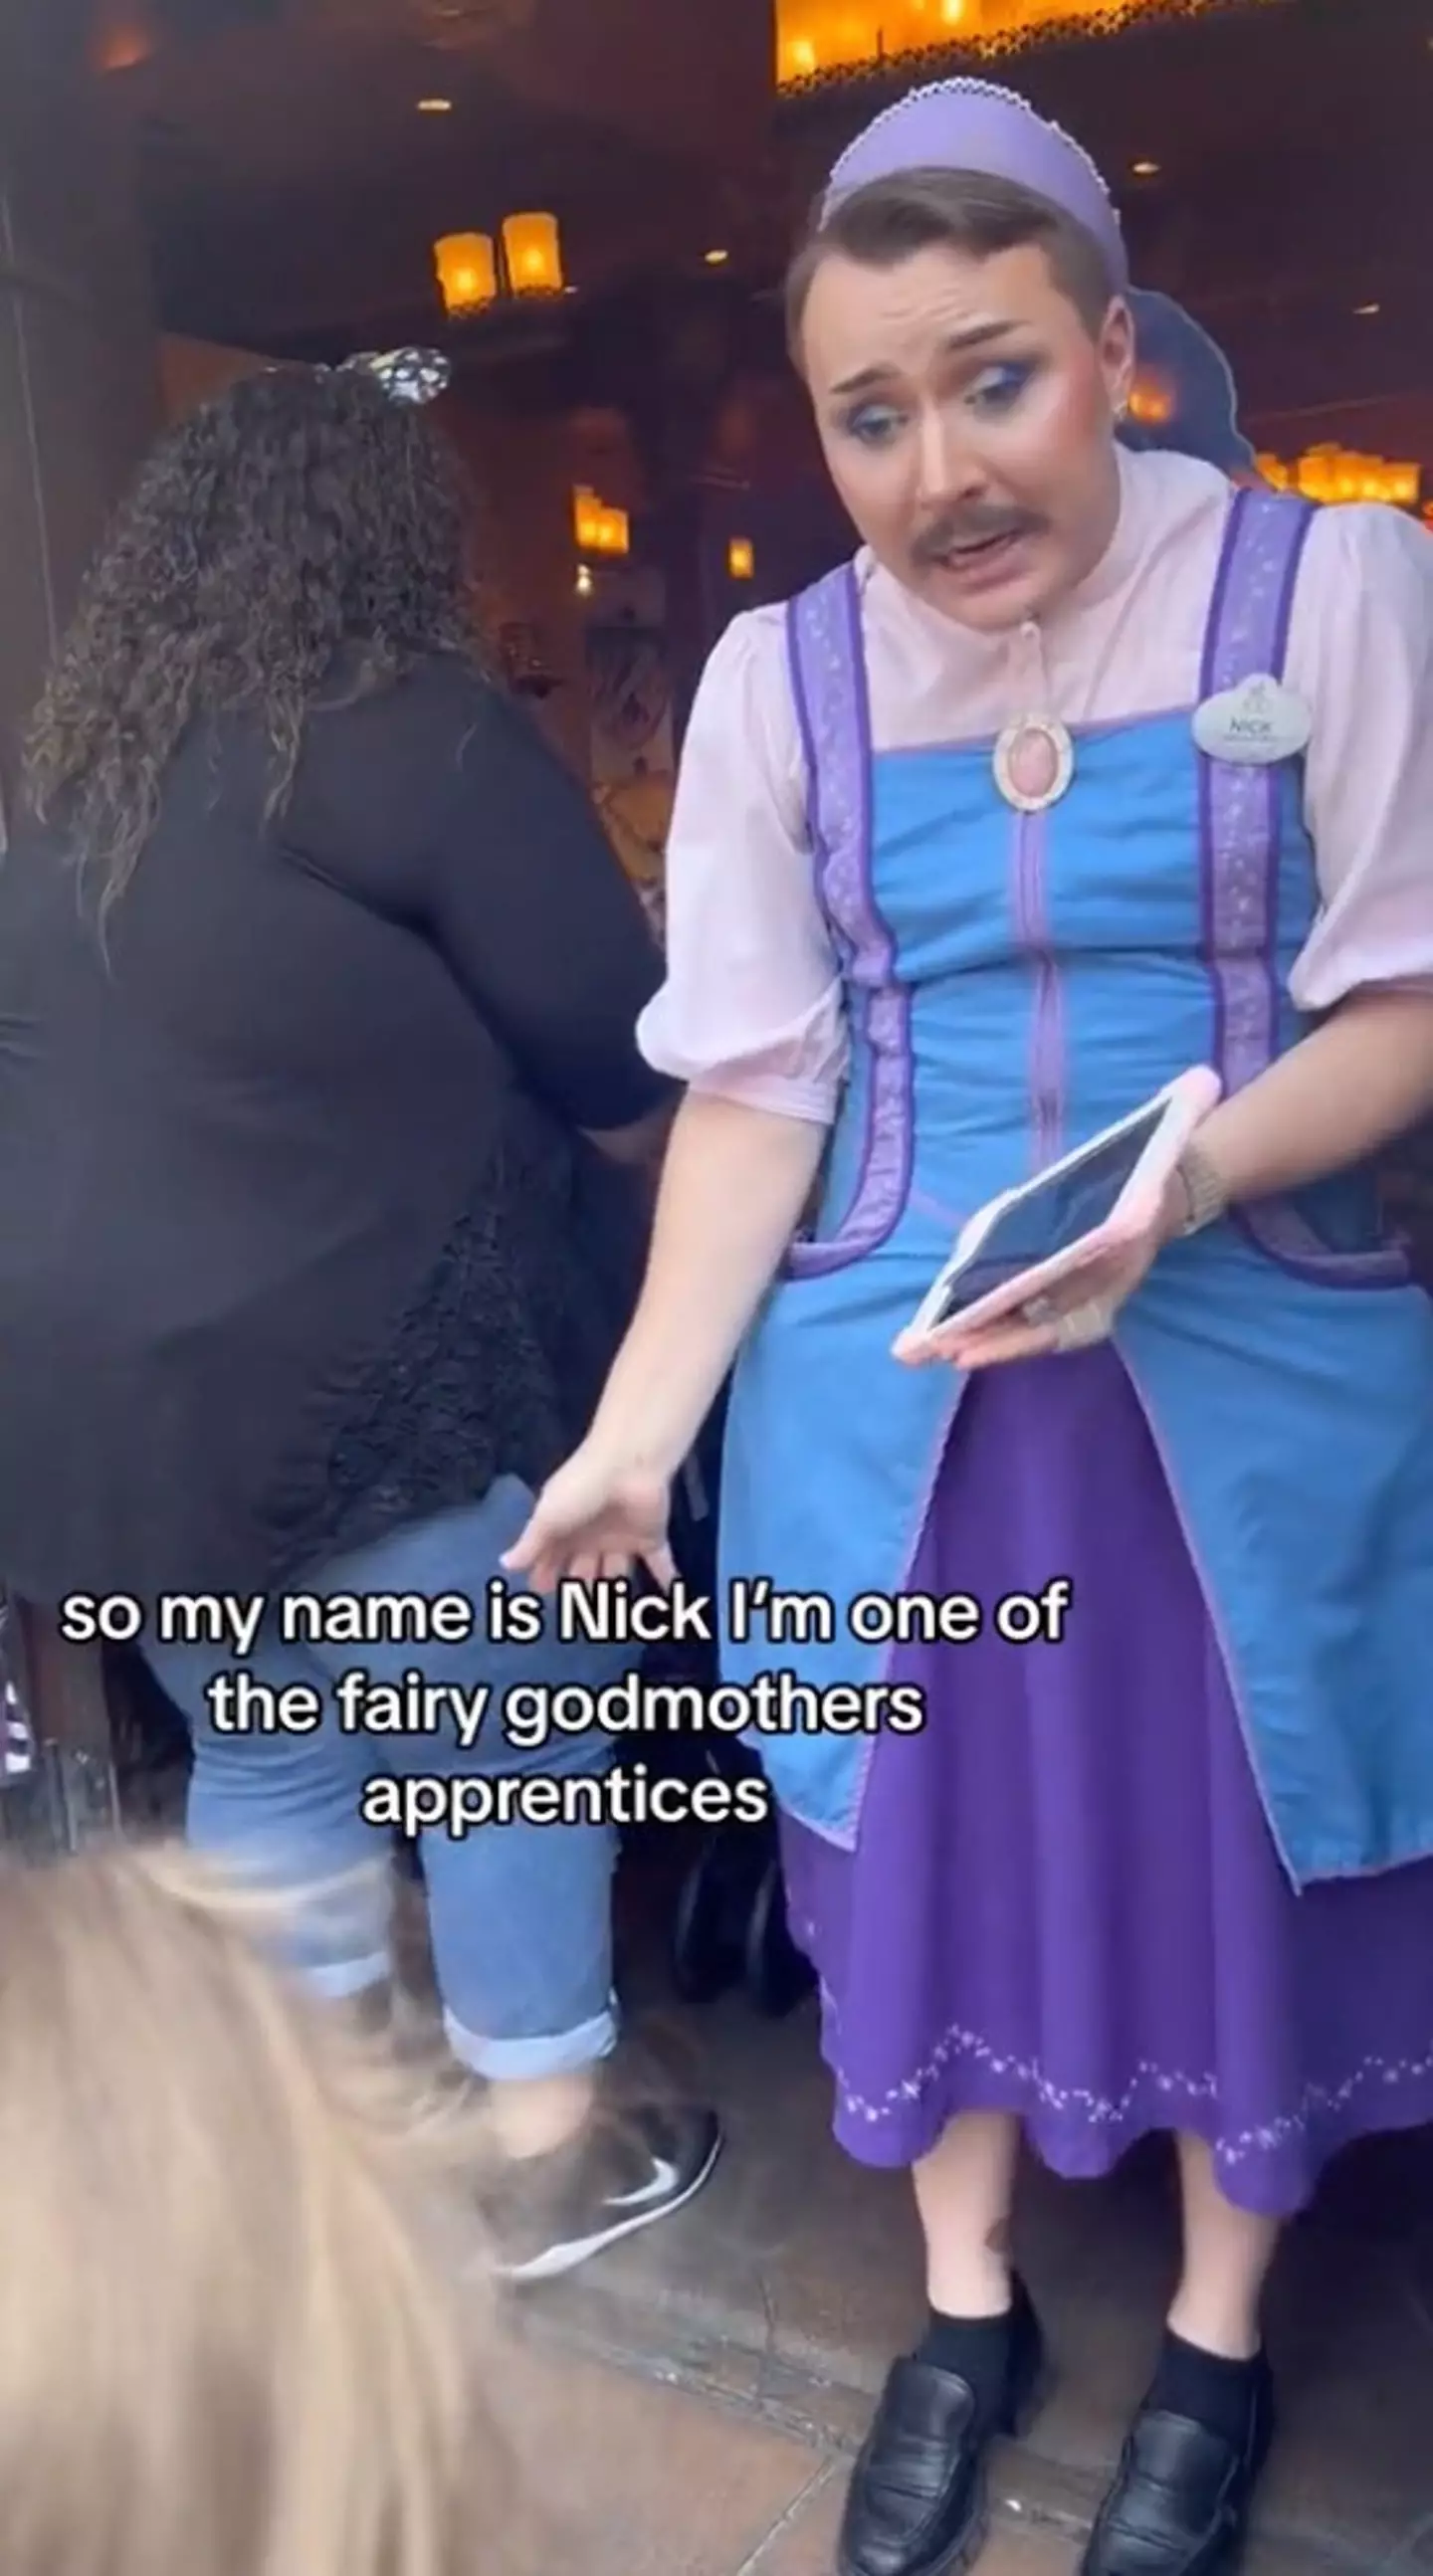 People are defending the appearance of Nick the Fairy Godmother at Disneyland.